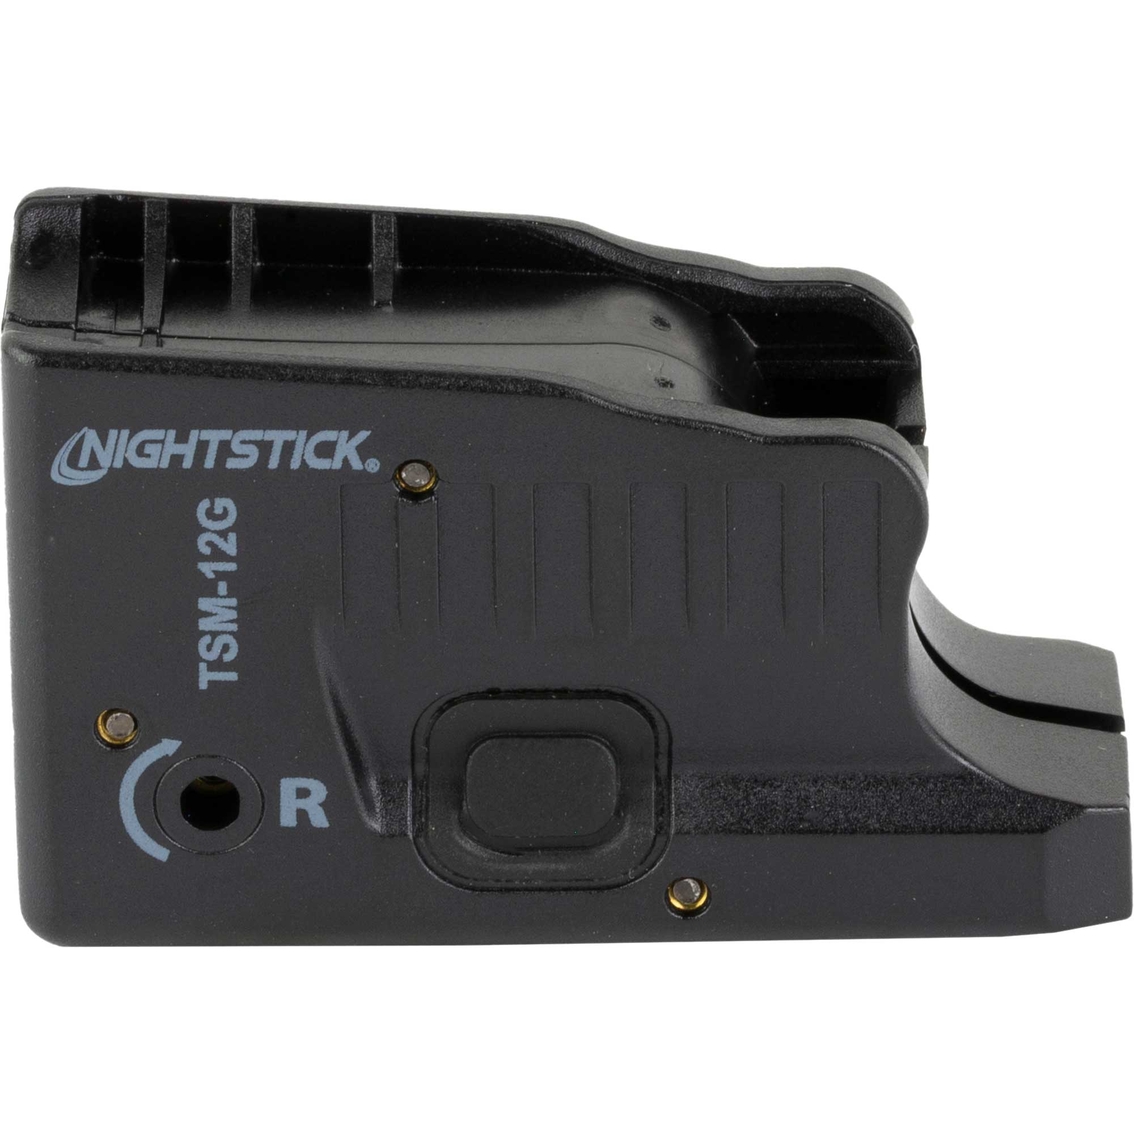 Nightstick Tsm-12g Compact Weaponlight With Green Laser For Glock 26/27 ...